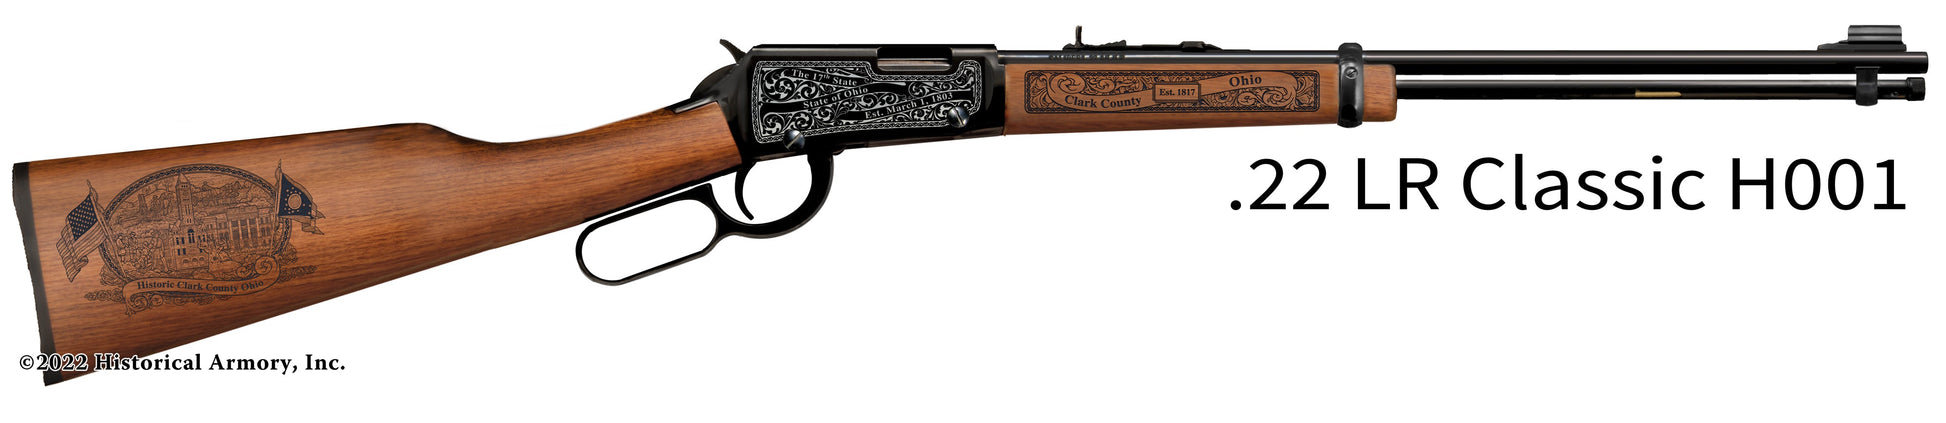 Clark County Ohio Engraved Henry H001 Rifle